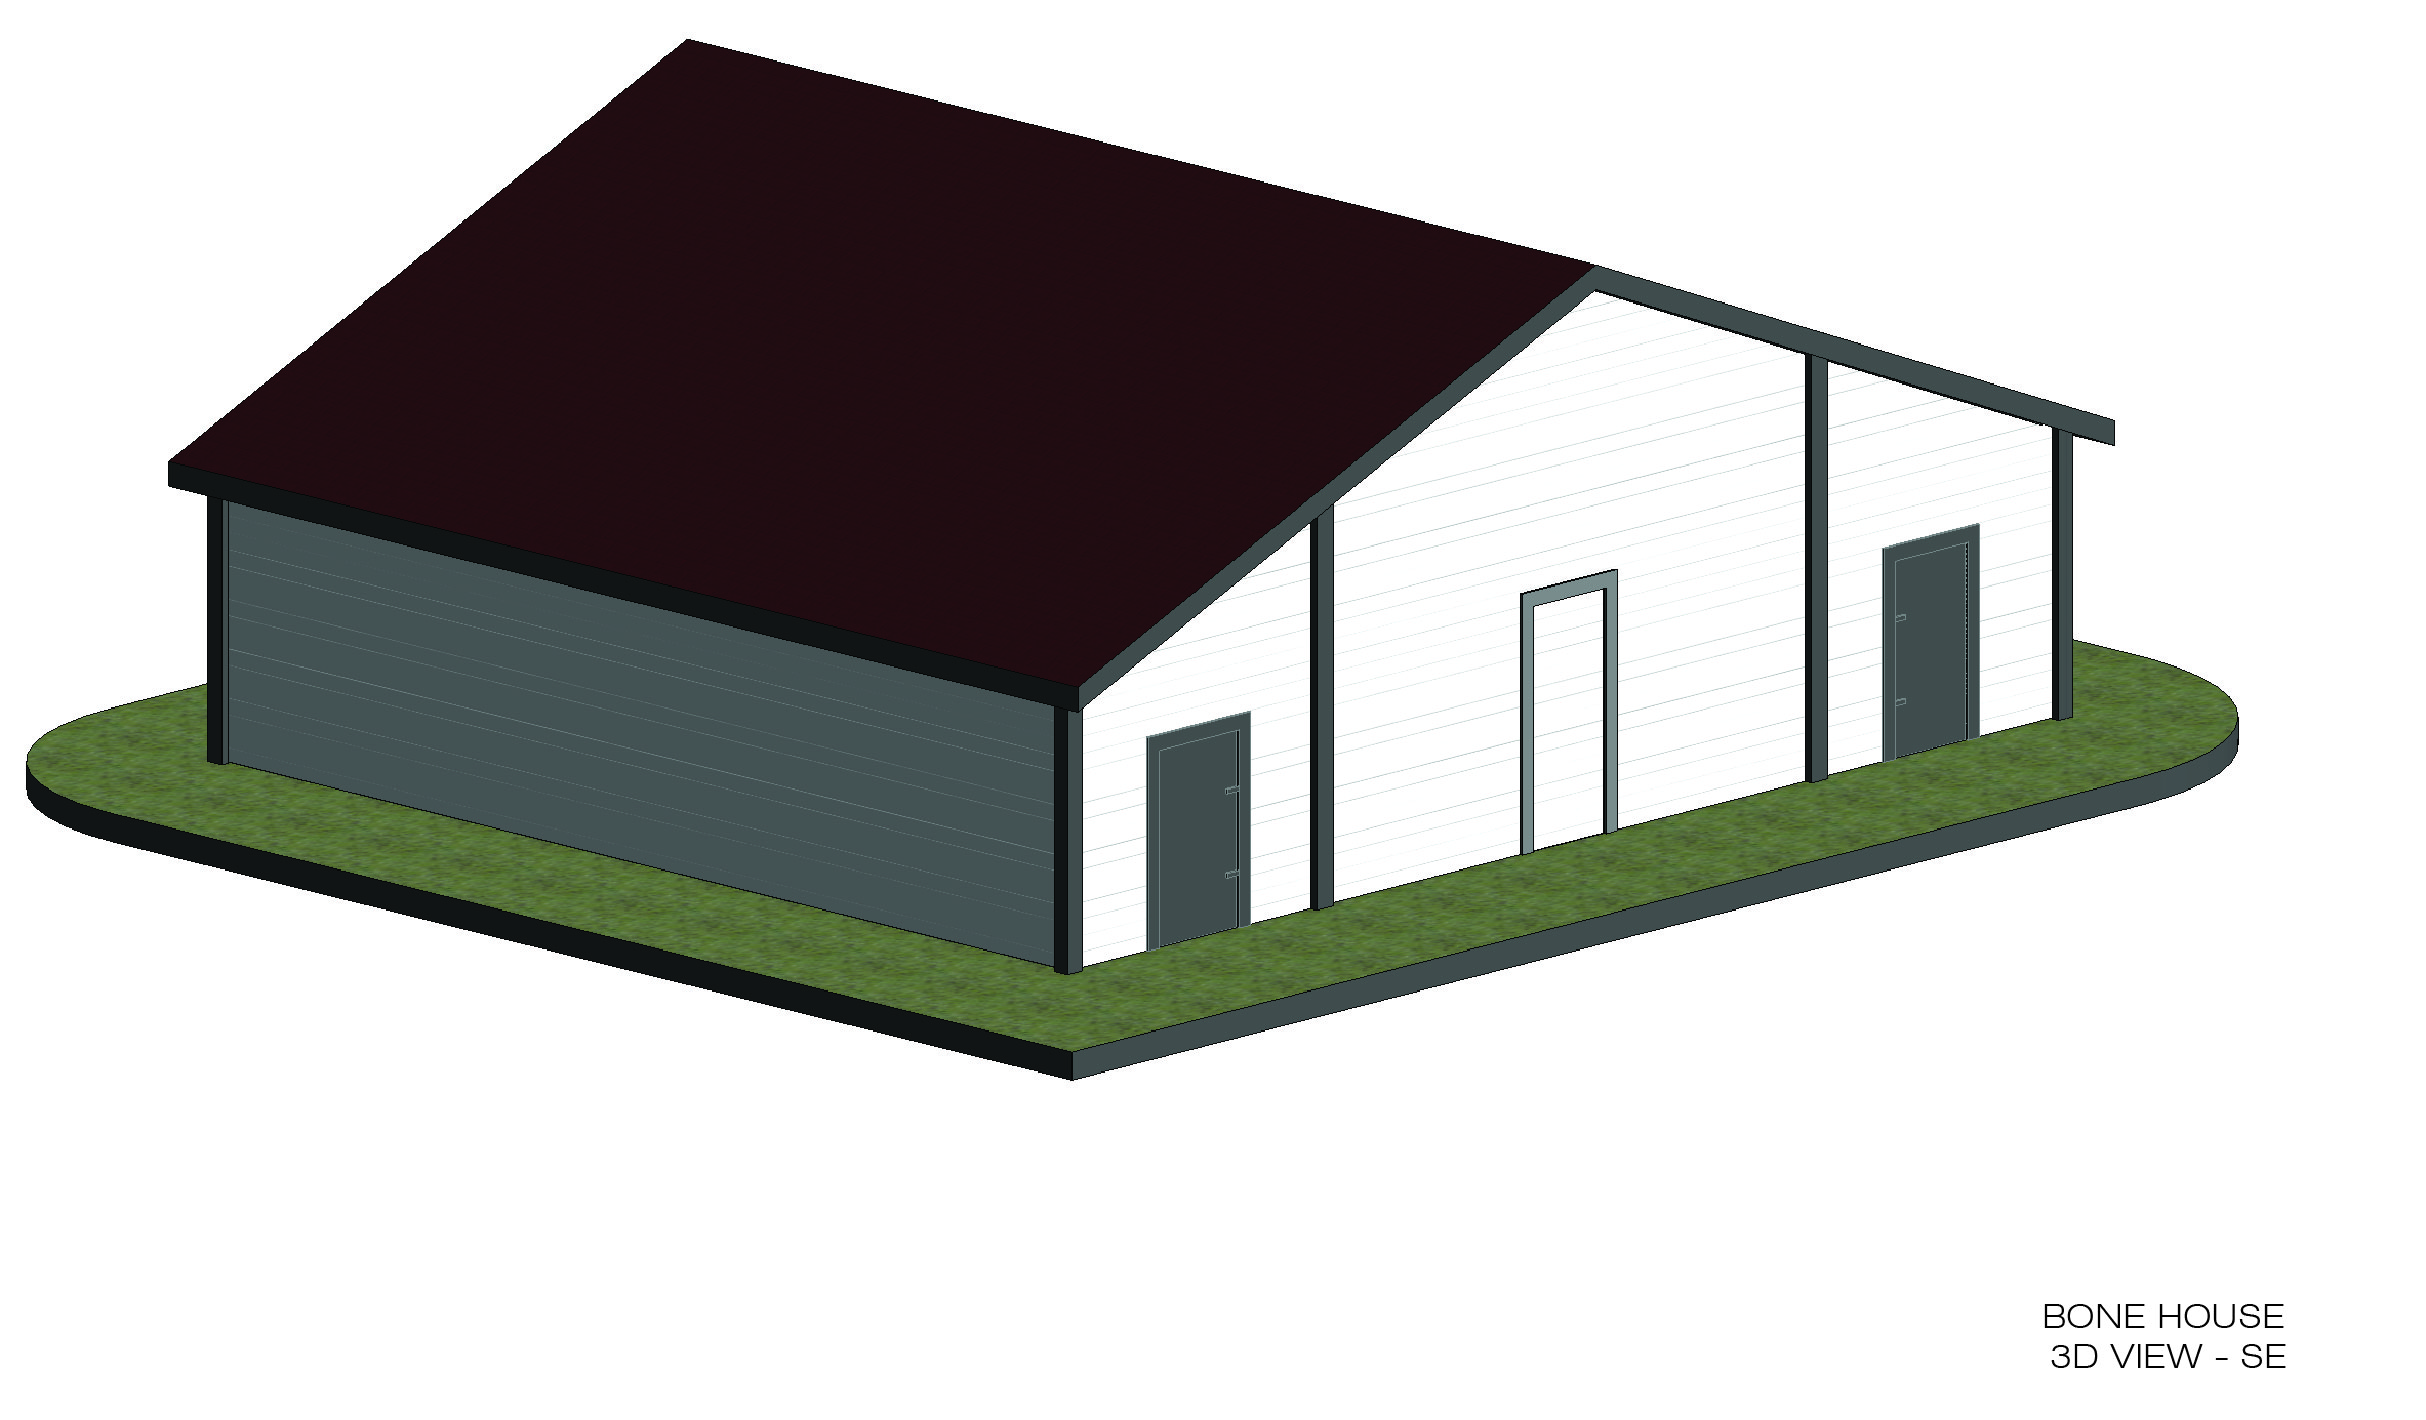 Southeast view of 3D model created in Revit from the laser scanning data collected of the Bonehouse.